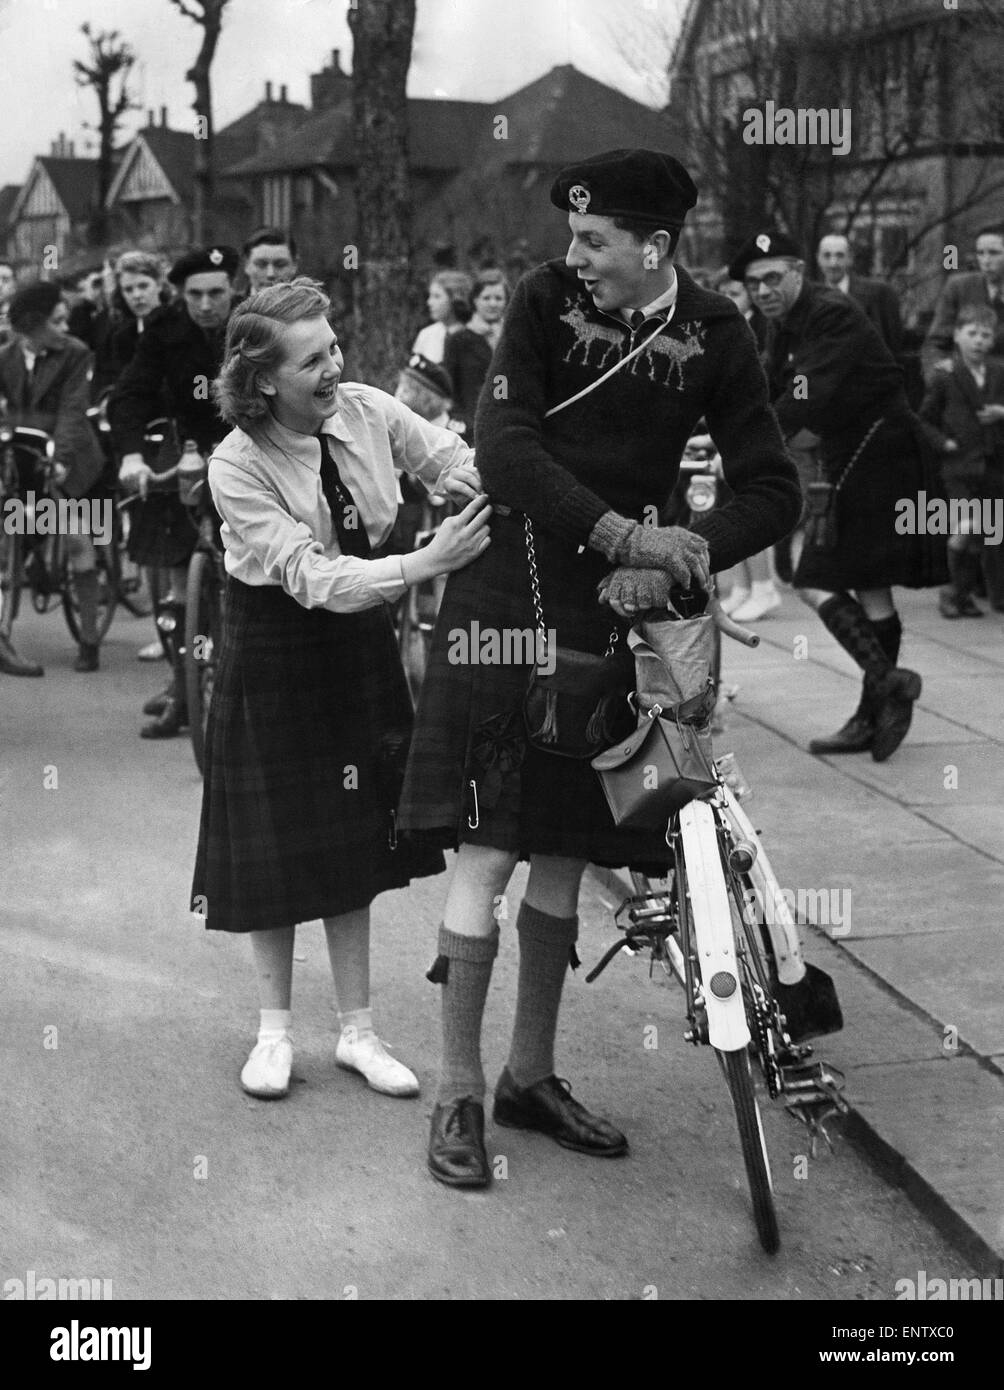 Mr. Gilbert Henry, Secretary of the Highlanders Cycling club at Grimsby says that they are the only all kilted cycling club in Britain. Kilts sometimes needs adjusting after several hours peddling. 28th February 1952 P033033 Stock Photo